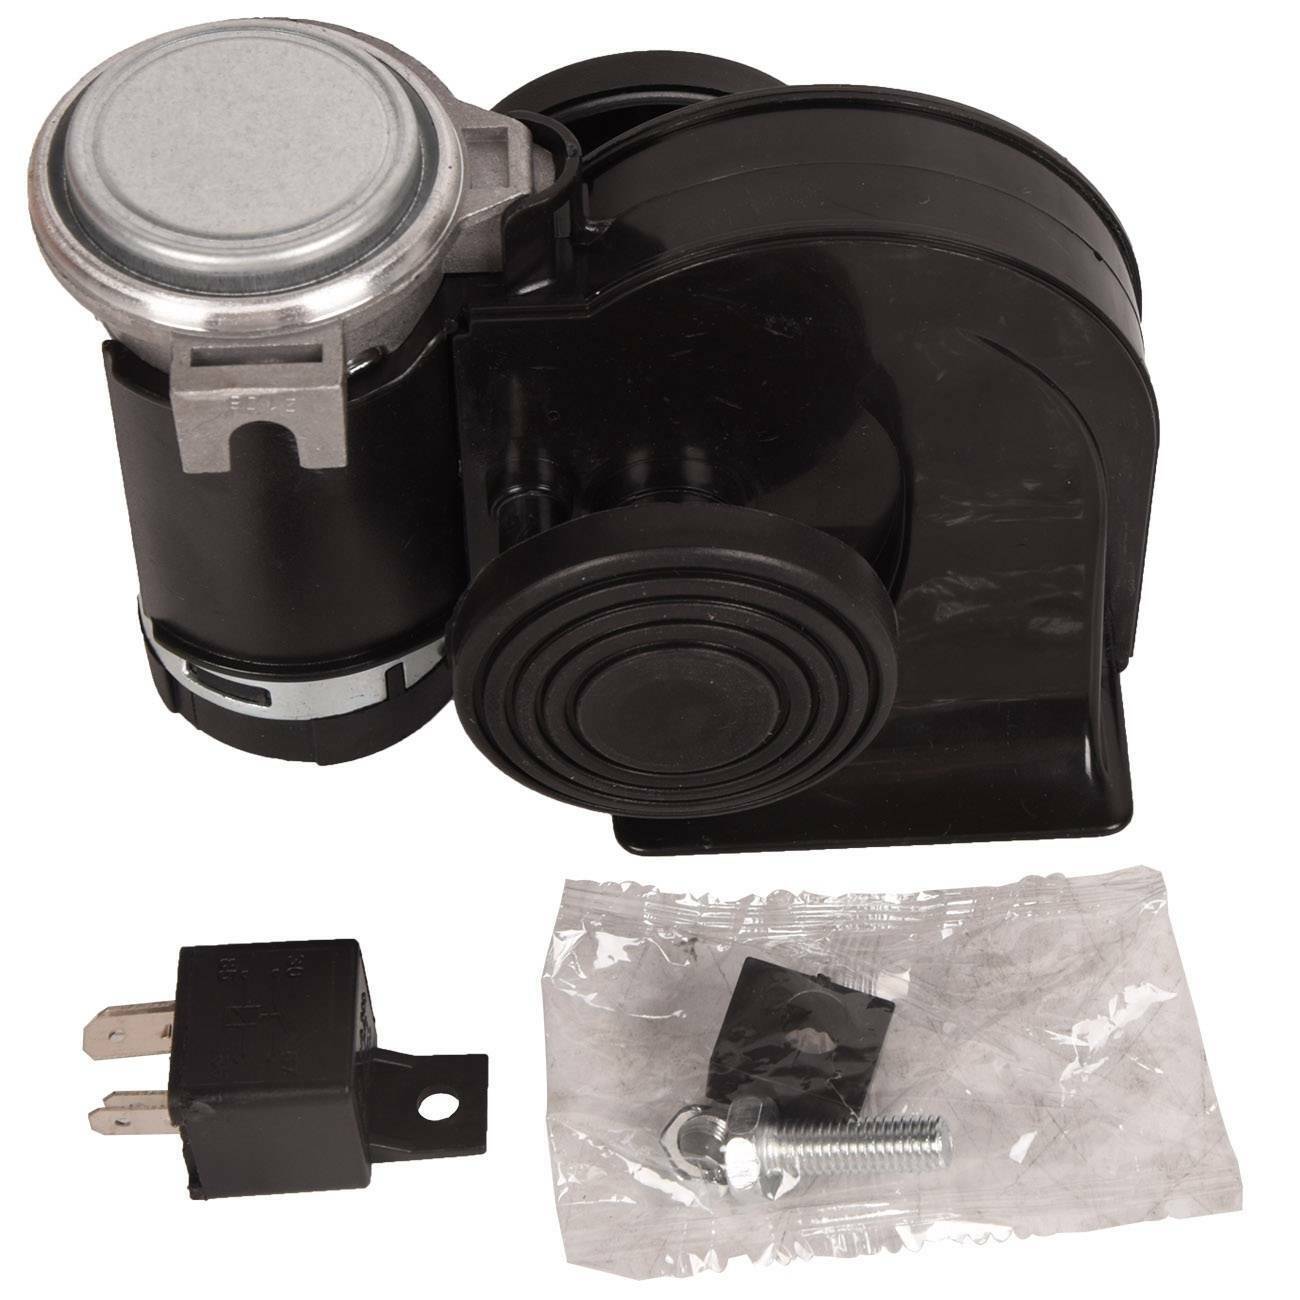 New Loud Electric Air Horn Kit Lower For Motorcycle or ATV - Black 12V